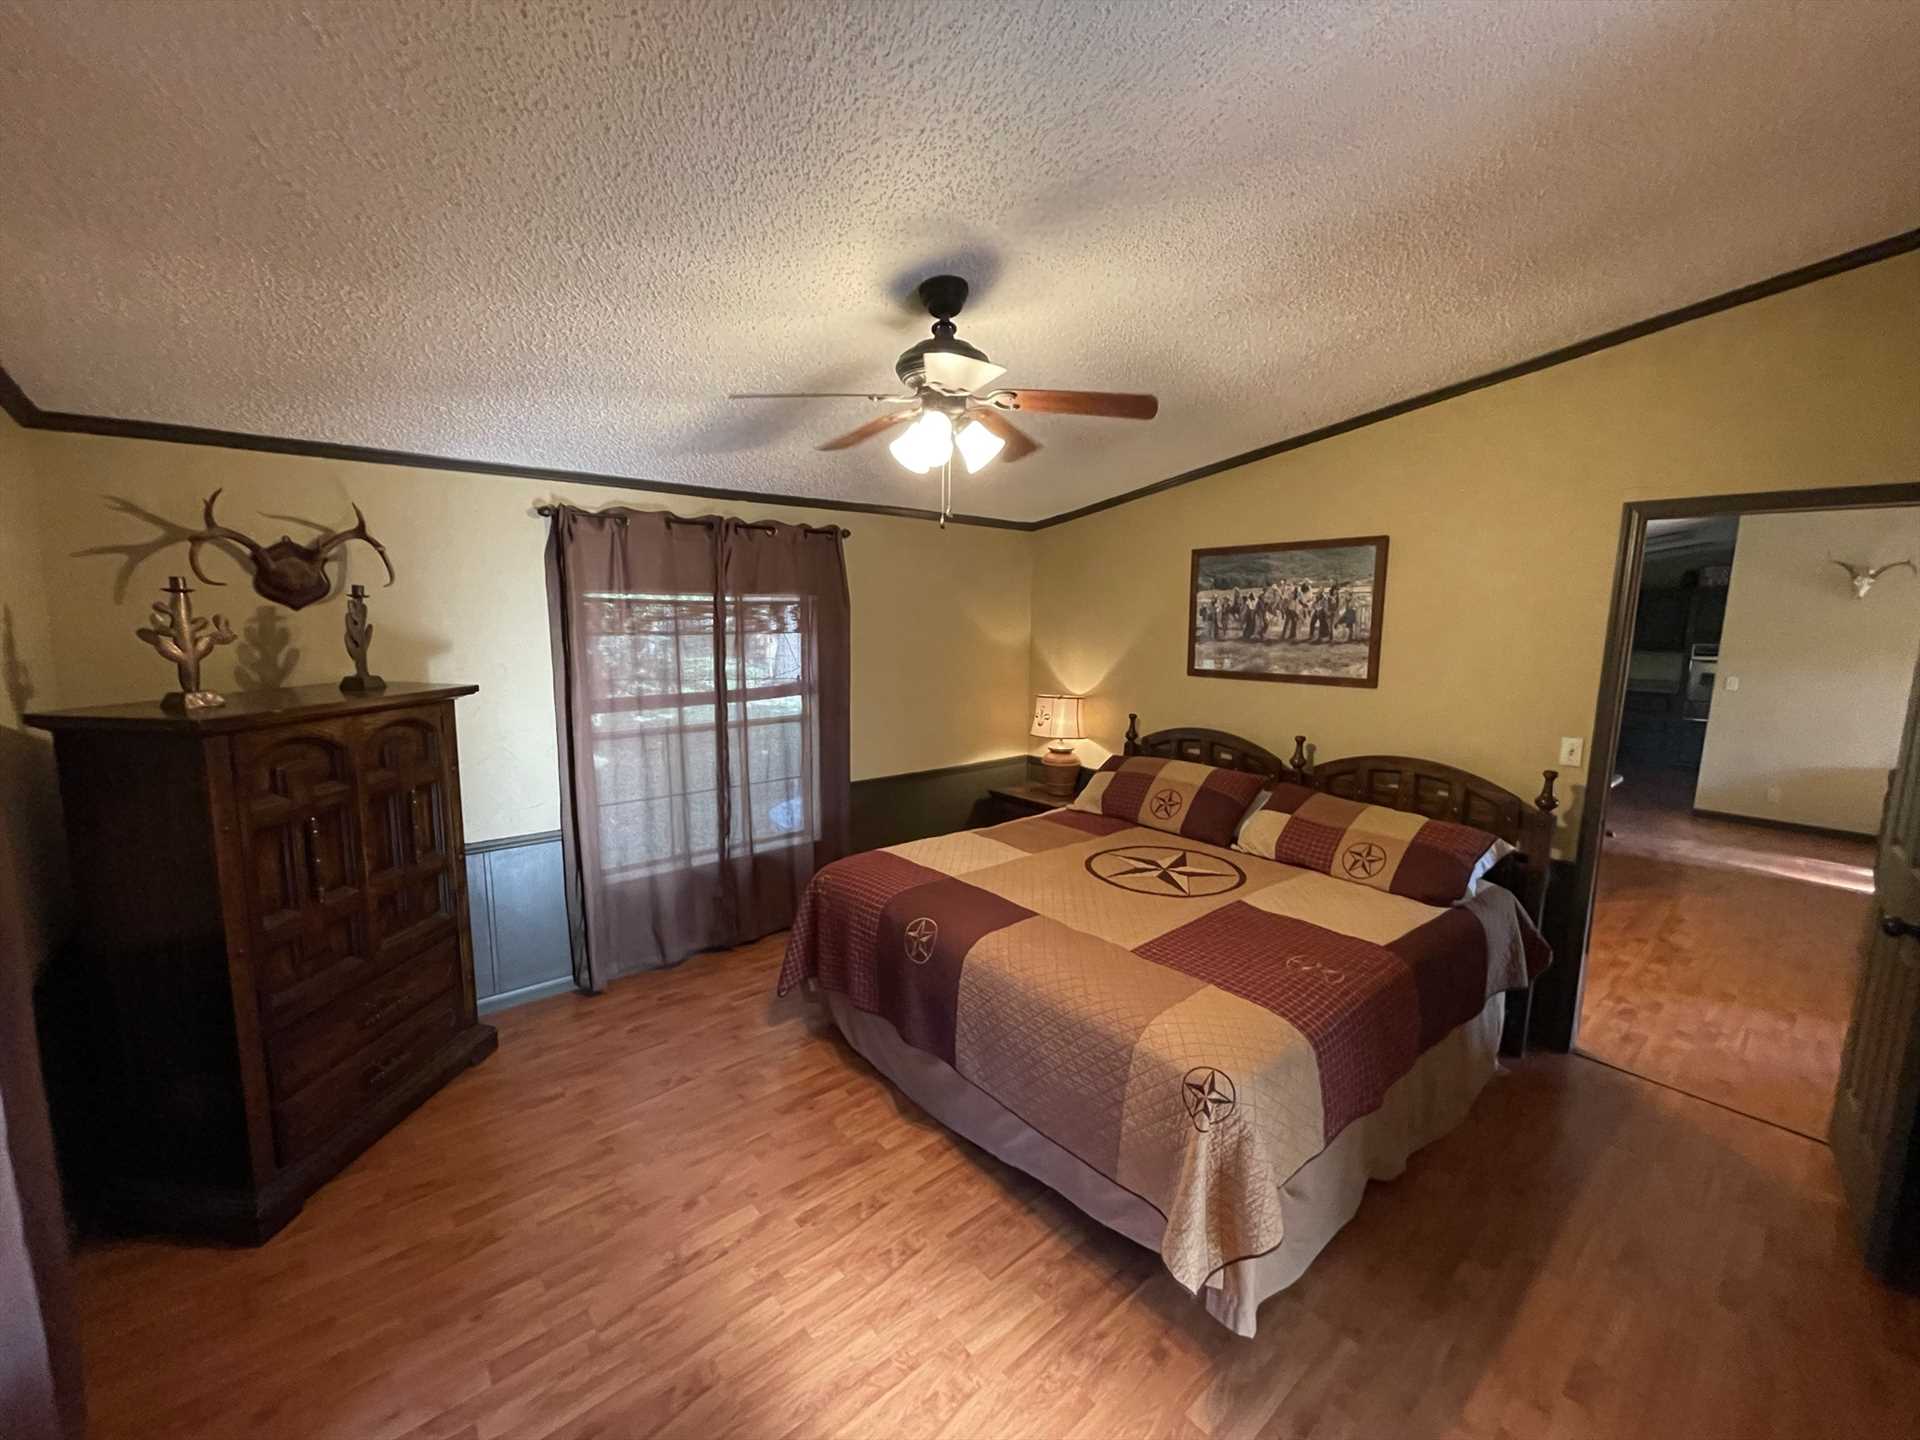                                                 The first bedroom in Rio Vista is warmly decorated, and features a big, soft king-sized bed. Fresh bed and bath linens can be provided for a reasonable fee.